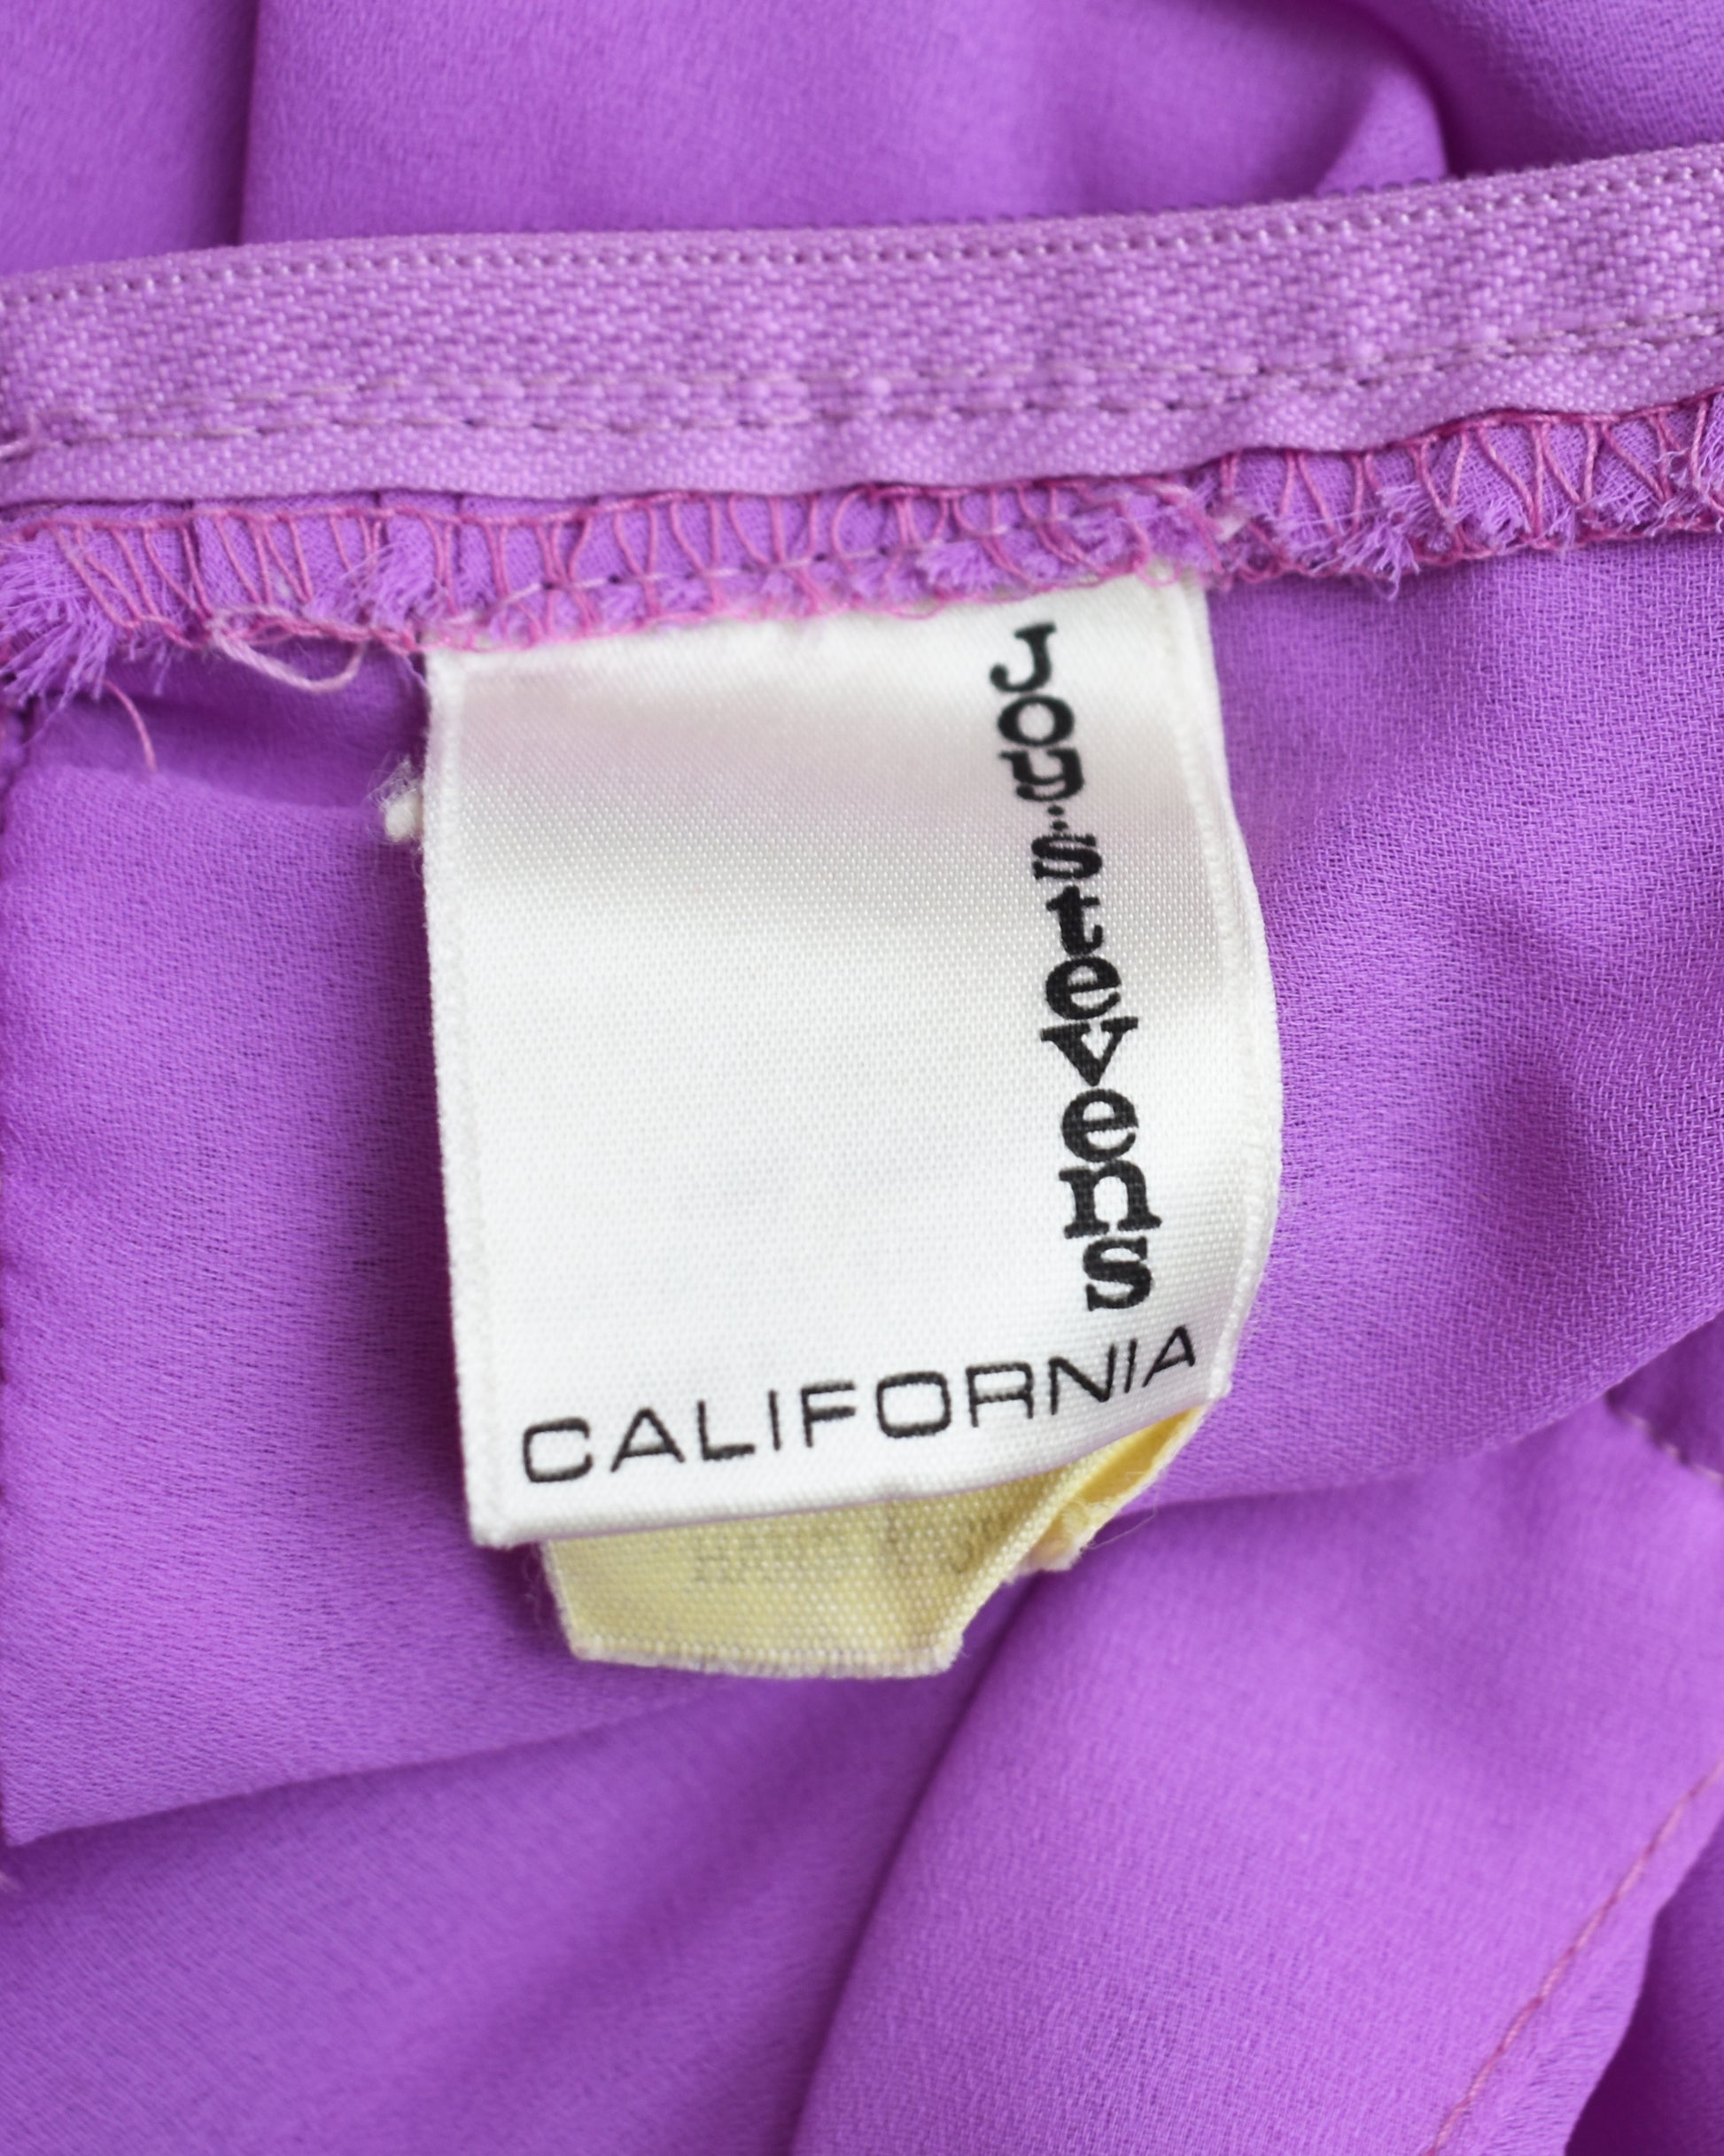 close up of the tag which says Joy Stevens California